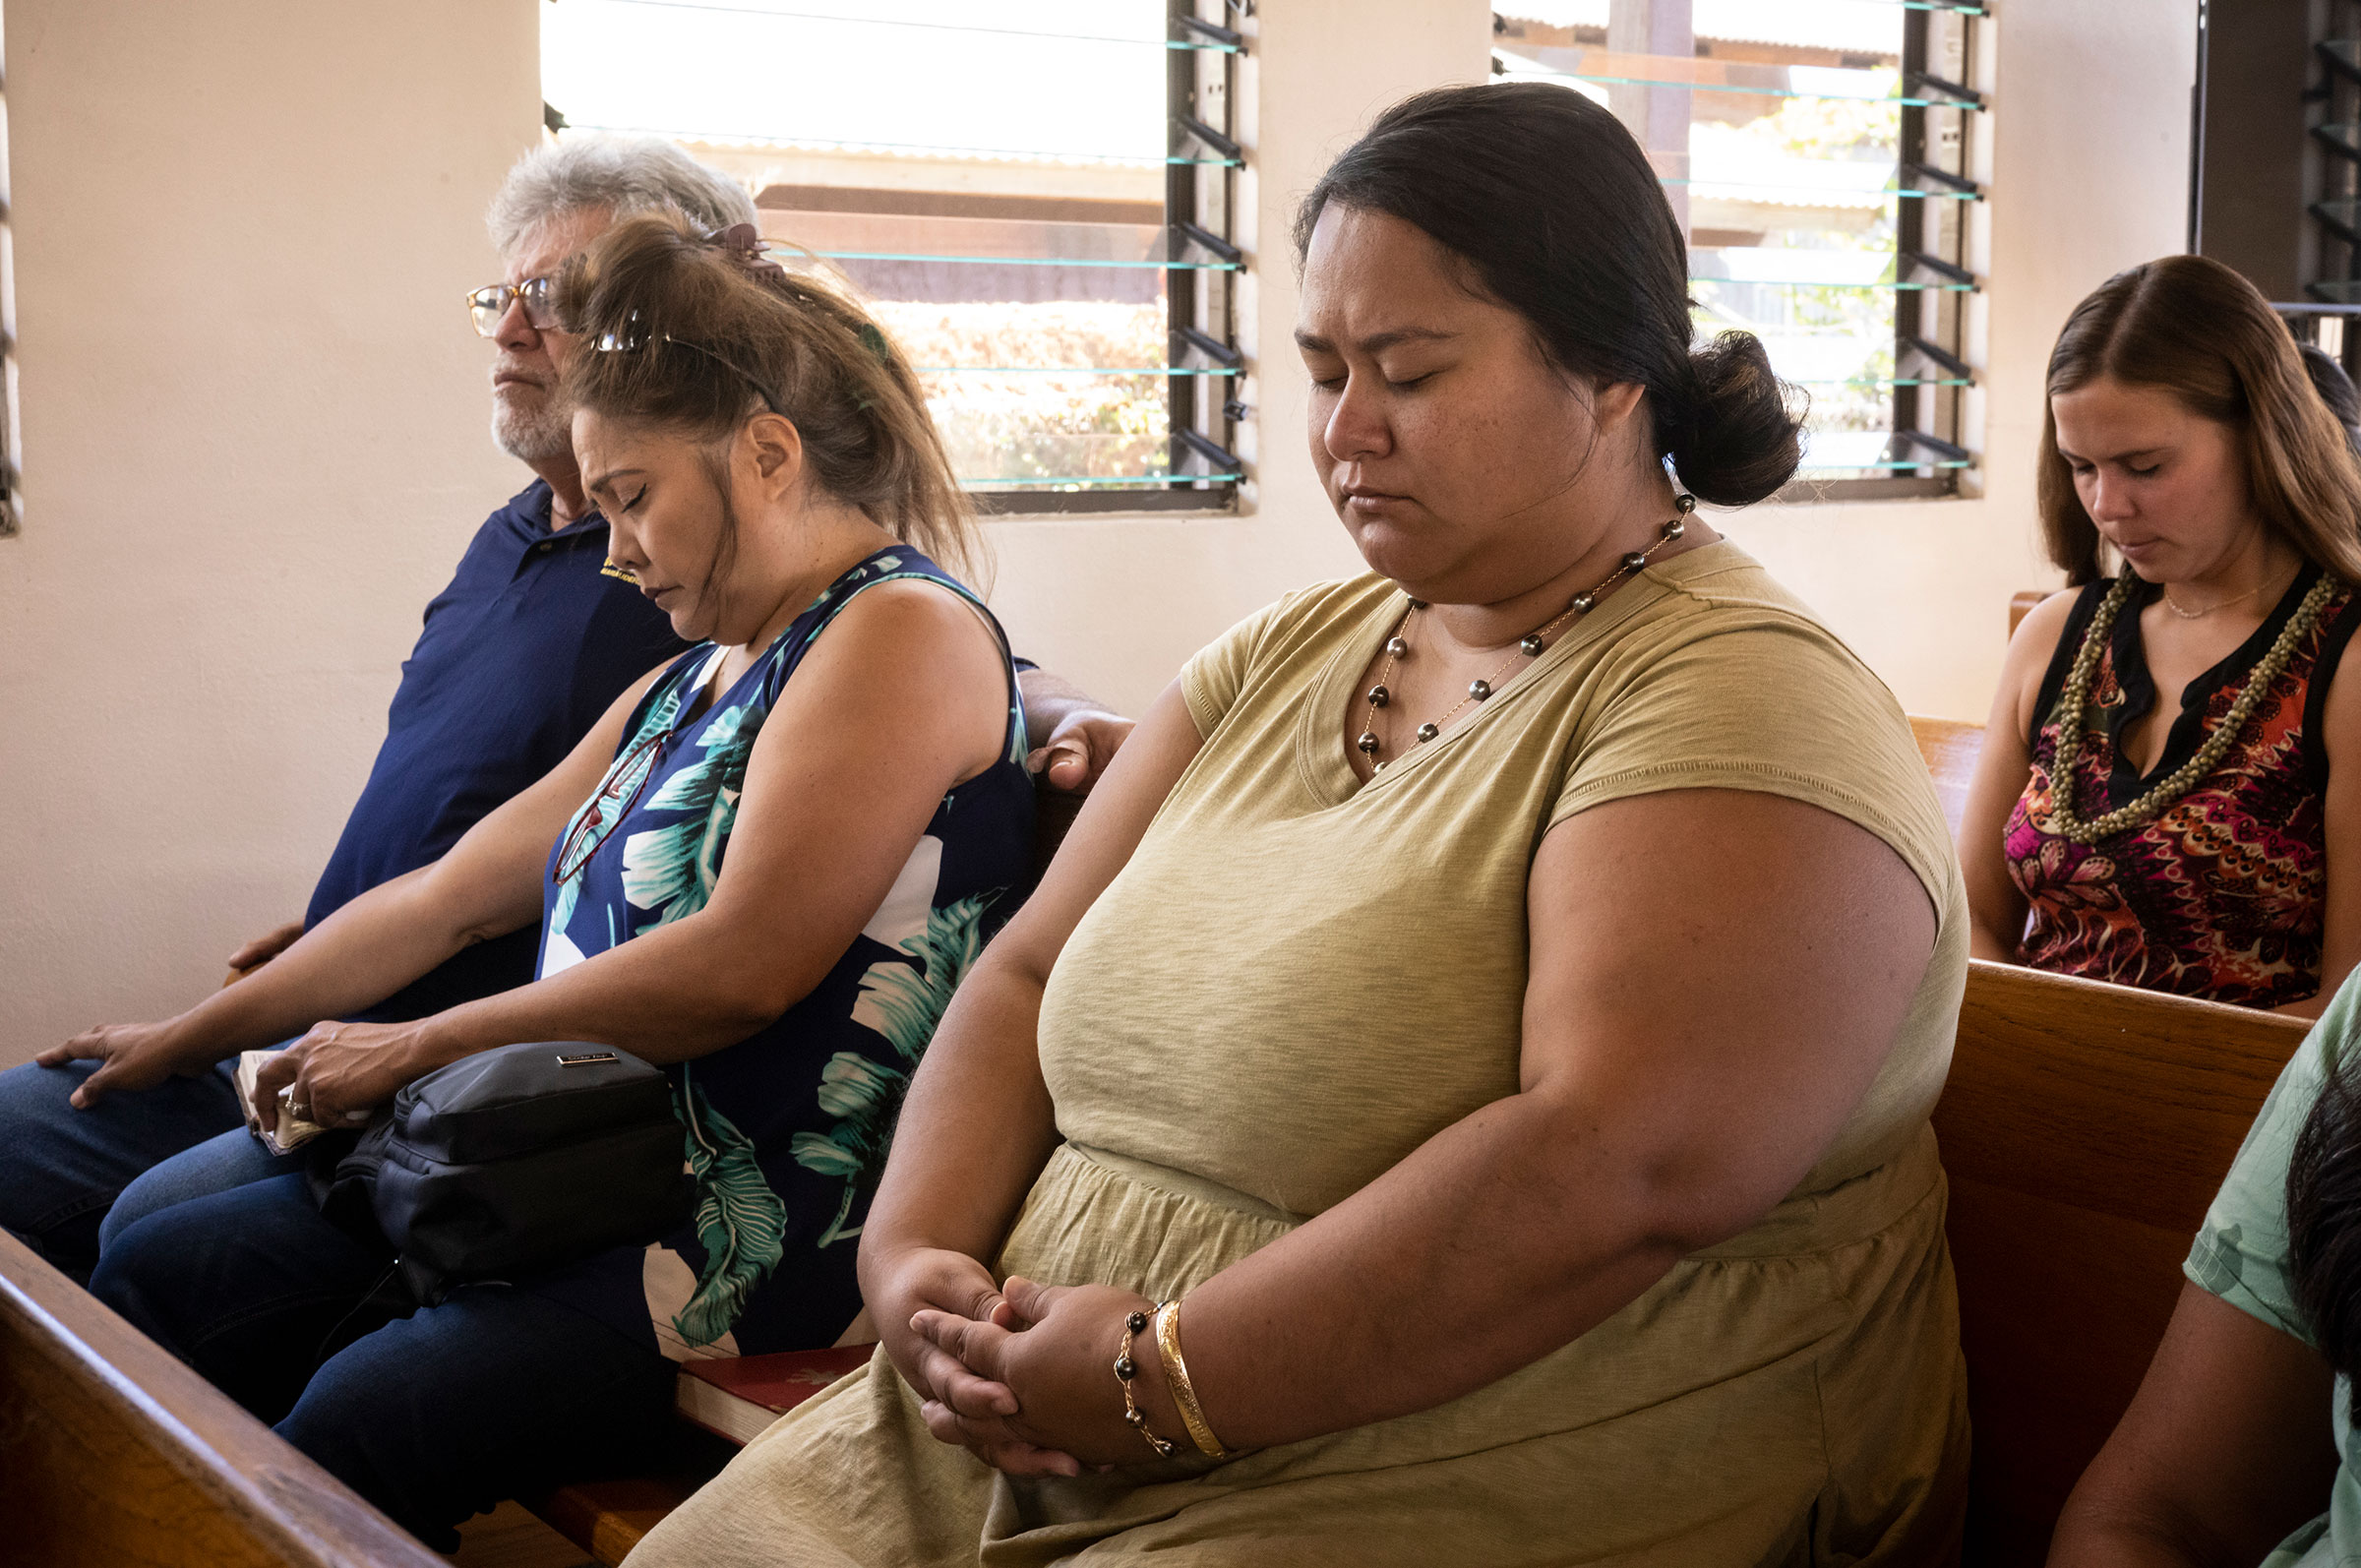 Parishioners of the Kupaianaha church pray during a service on Aug. 13. (David Butow for TIME)